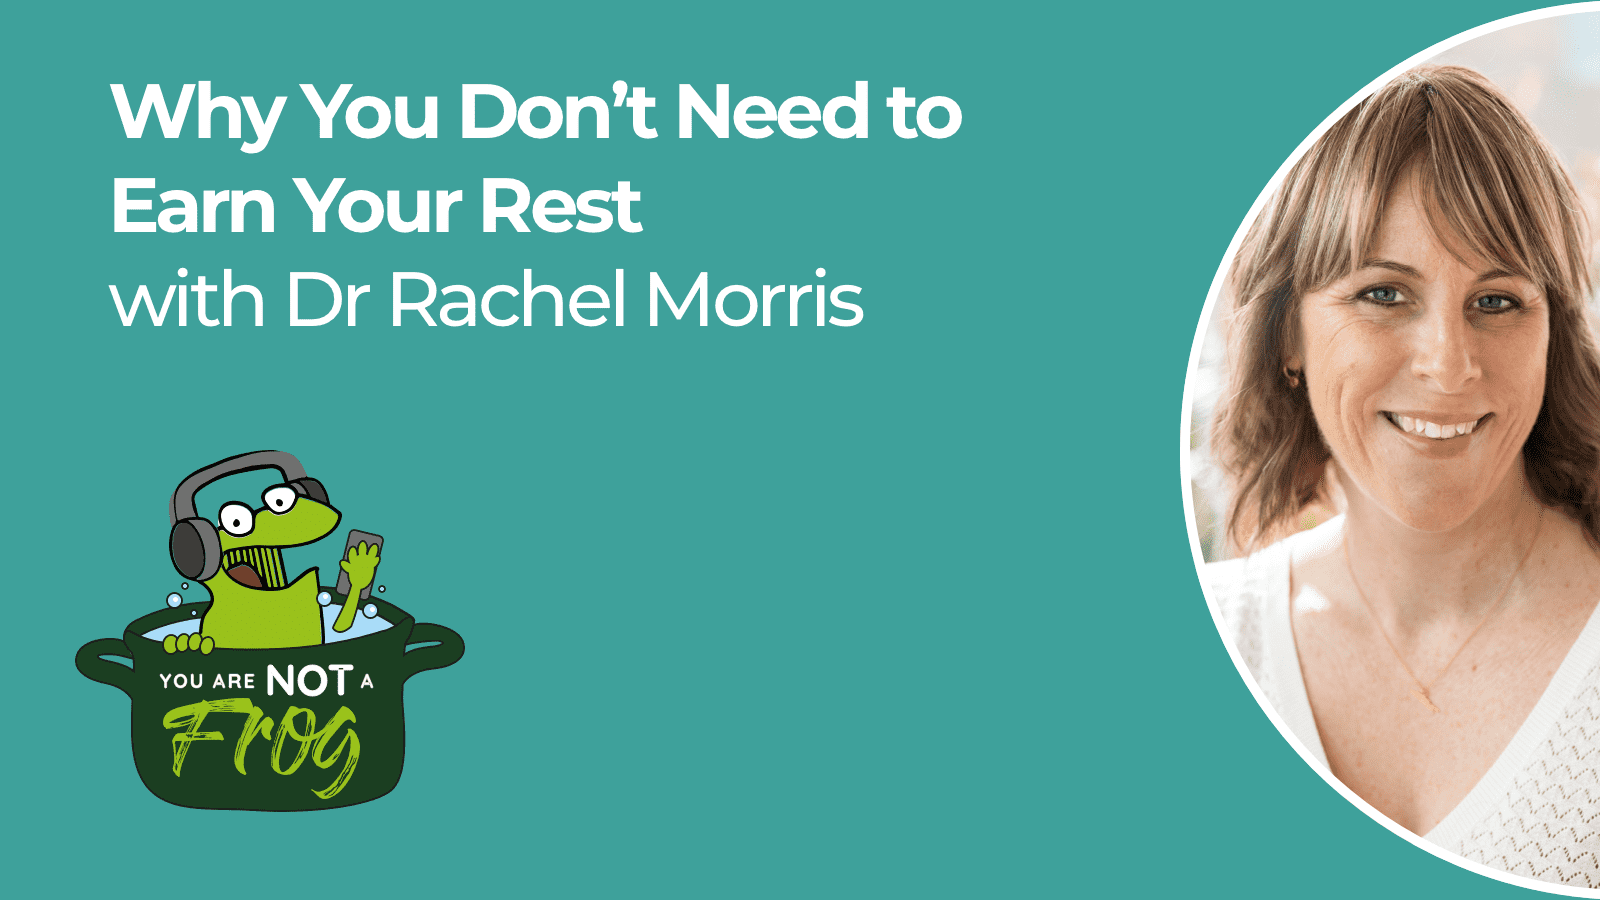 Why You Don’t Need to Earn Your Rest